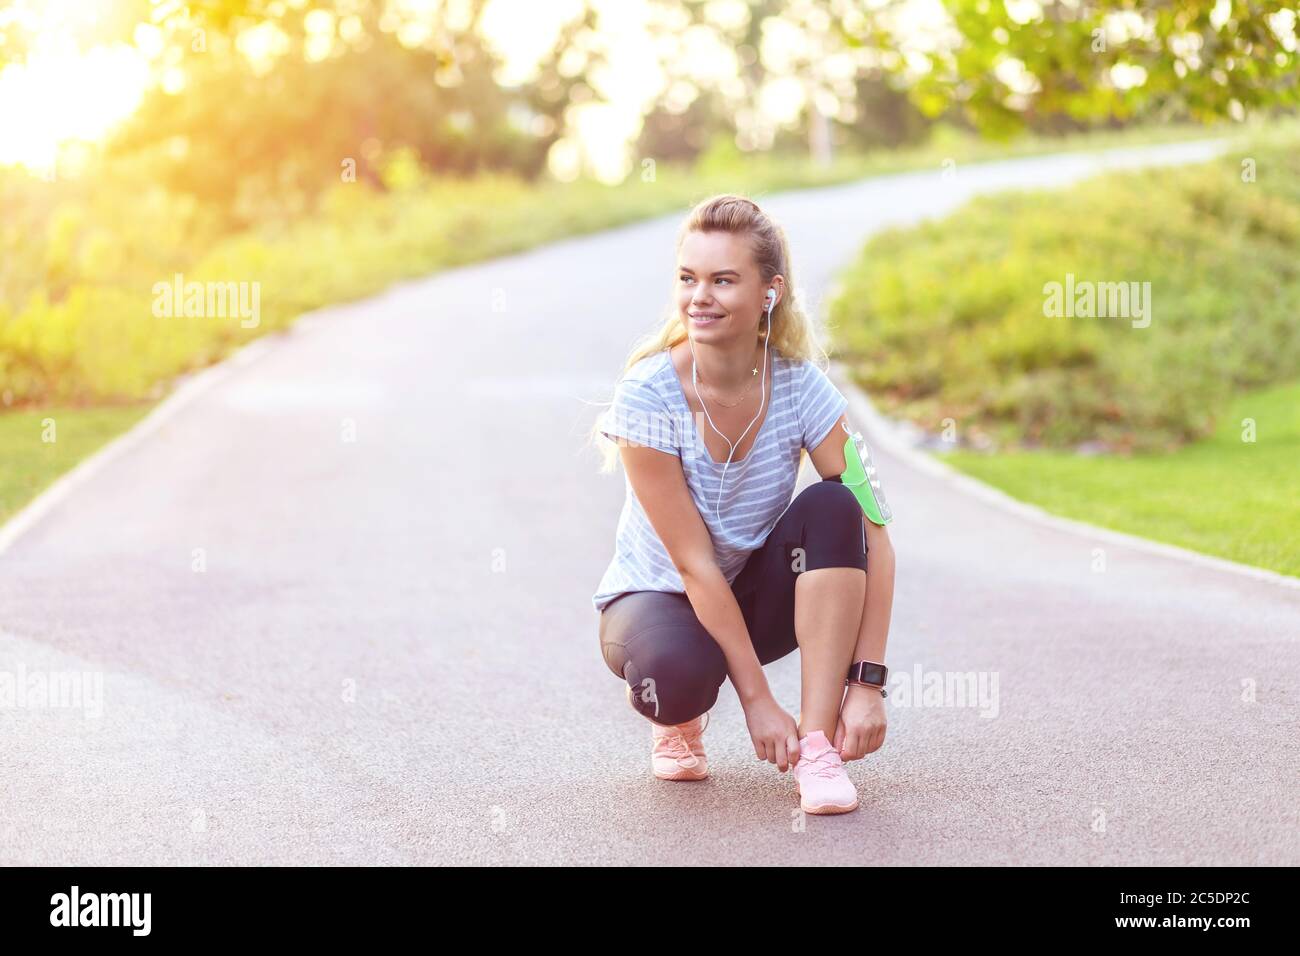 Young fitness woman tie shoelace of sport shoes on city running track Stock Photo